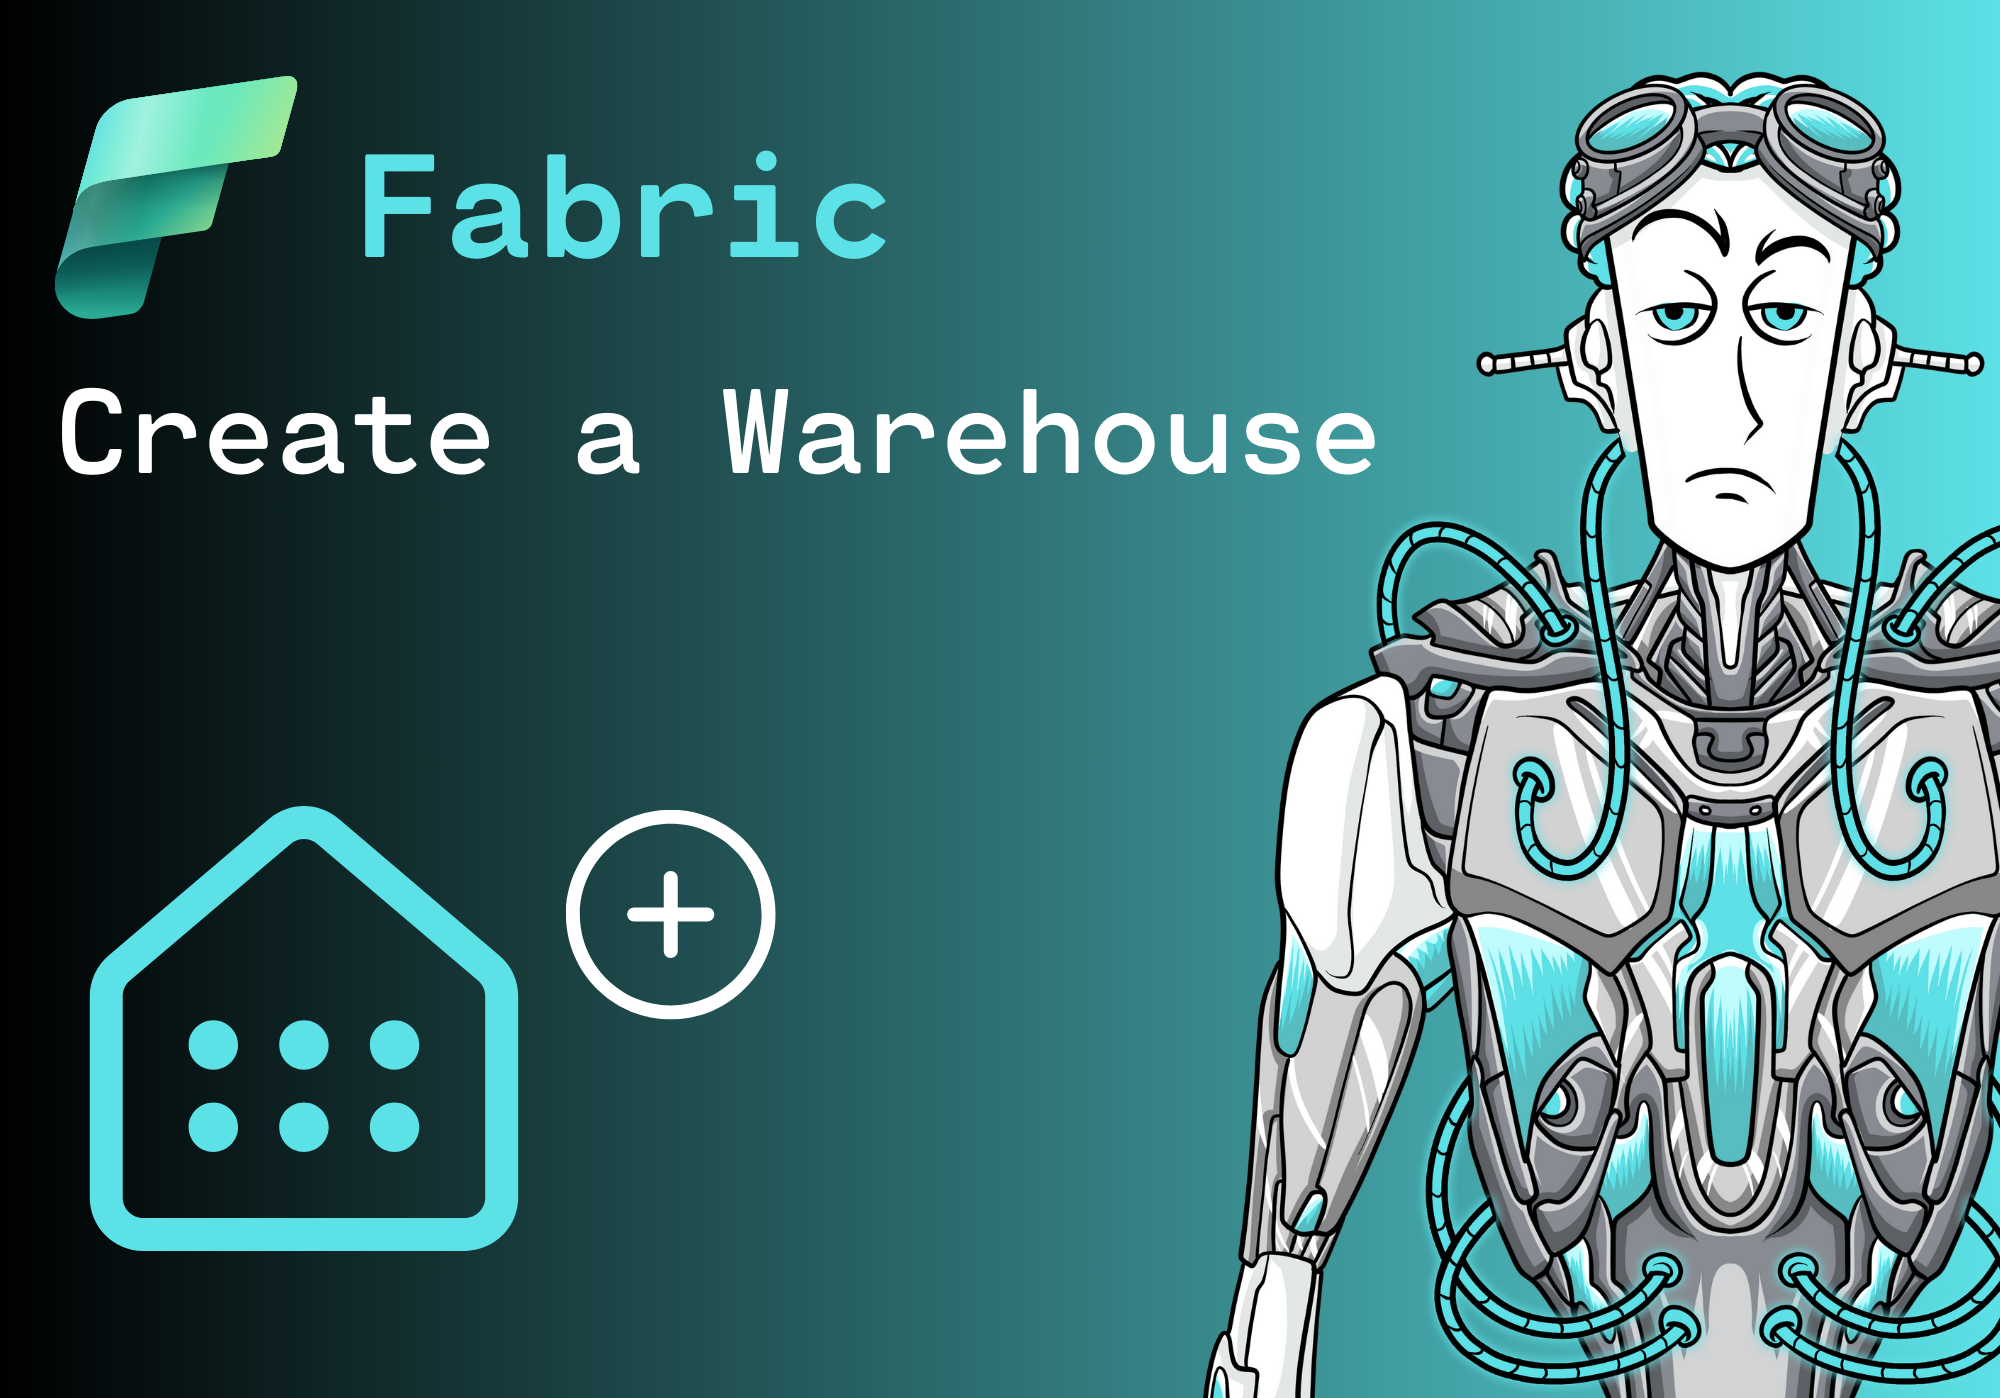 How to create a Warehouse in Microsoft Fabric: A Step-by-Step Guide